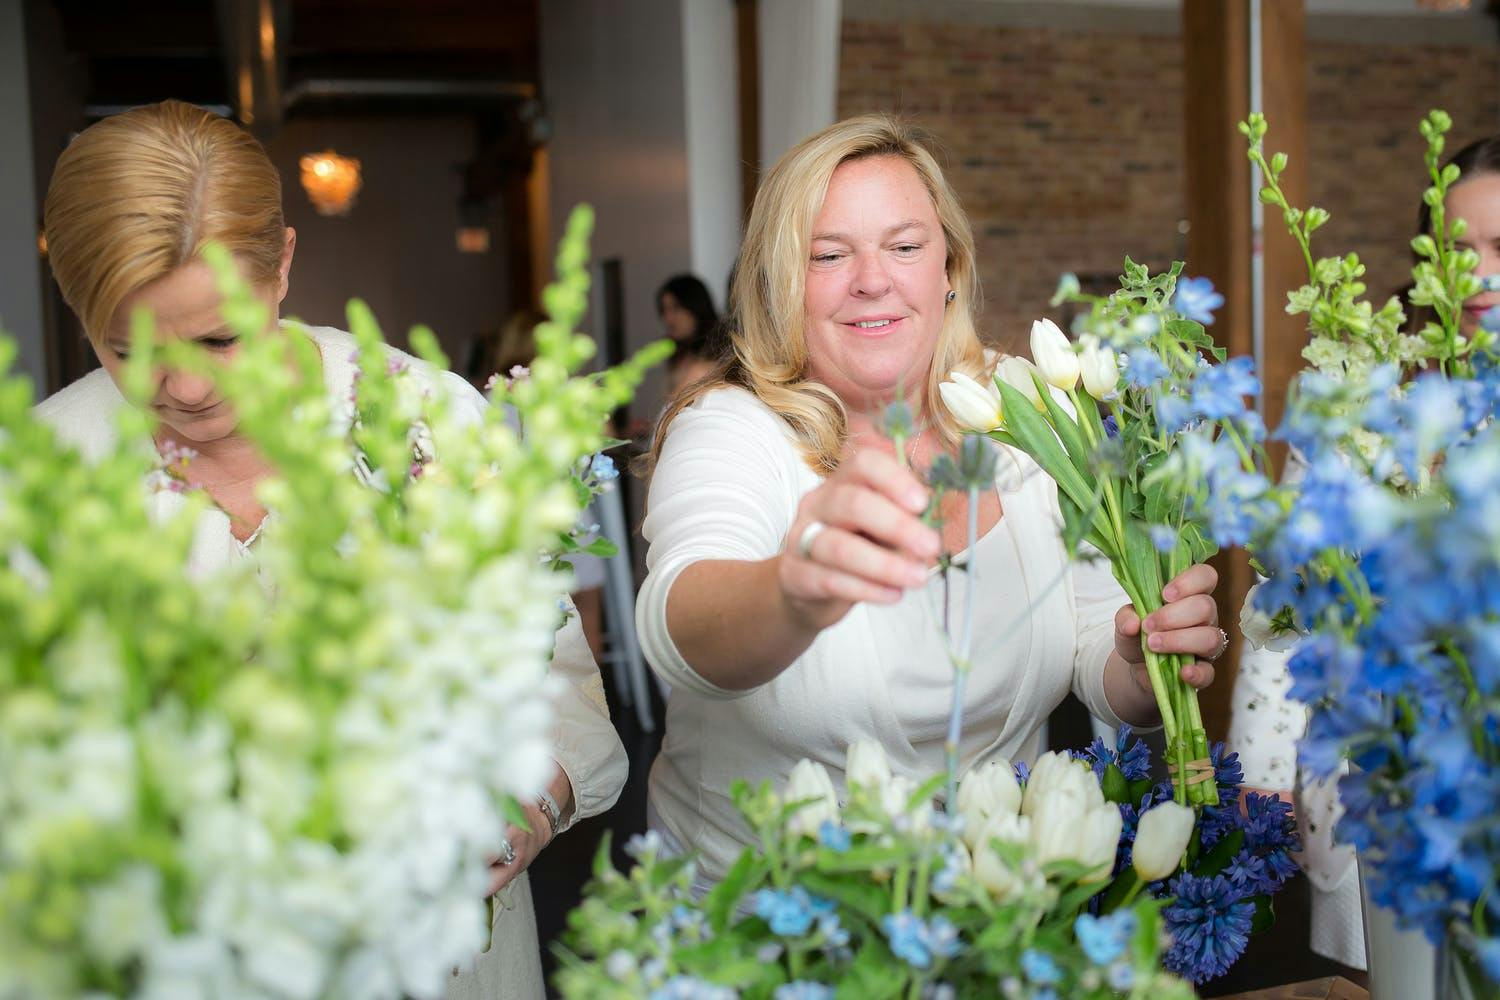 Two Women at Build Your Own Bouquet Station at Baby Shower | PartySlate